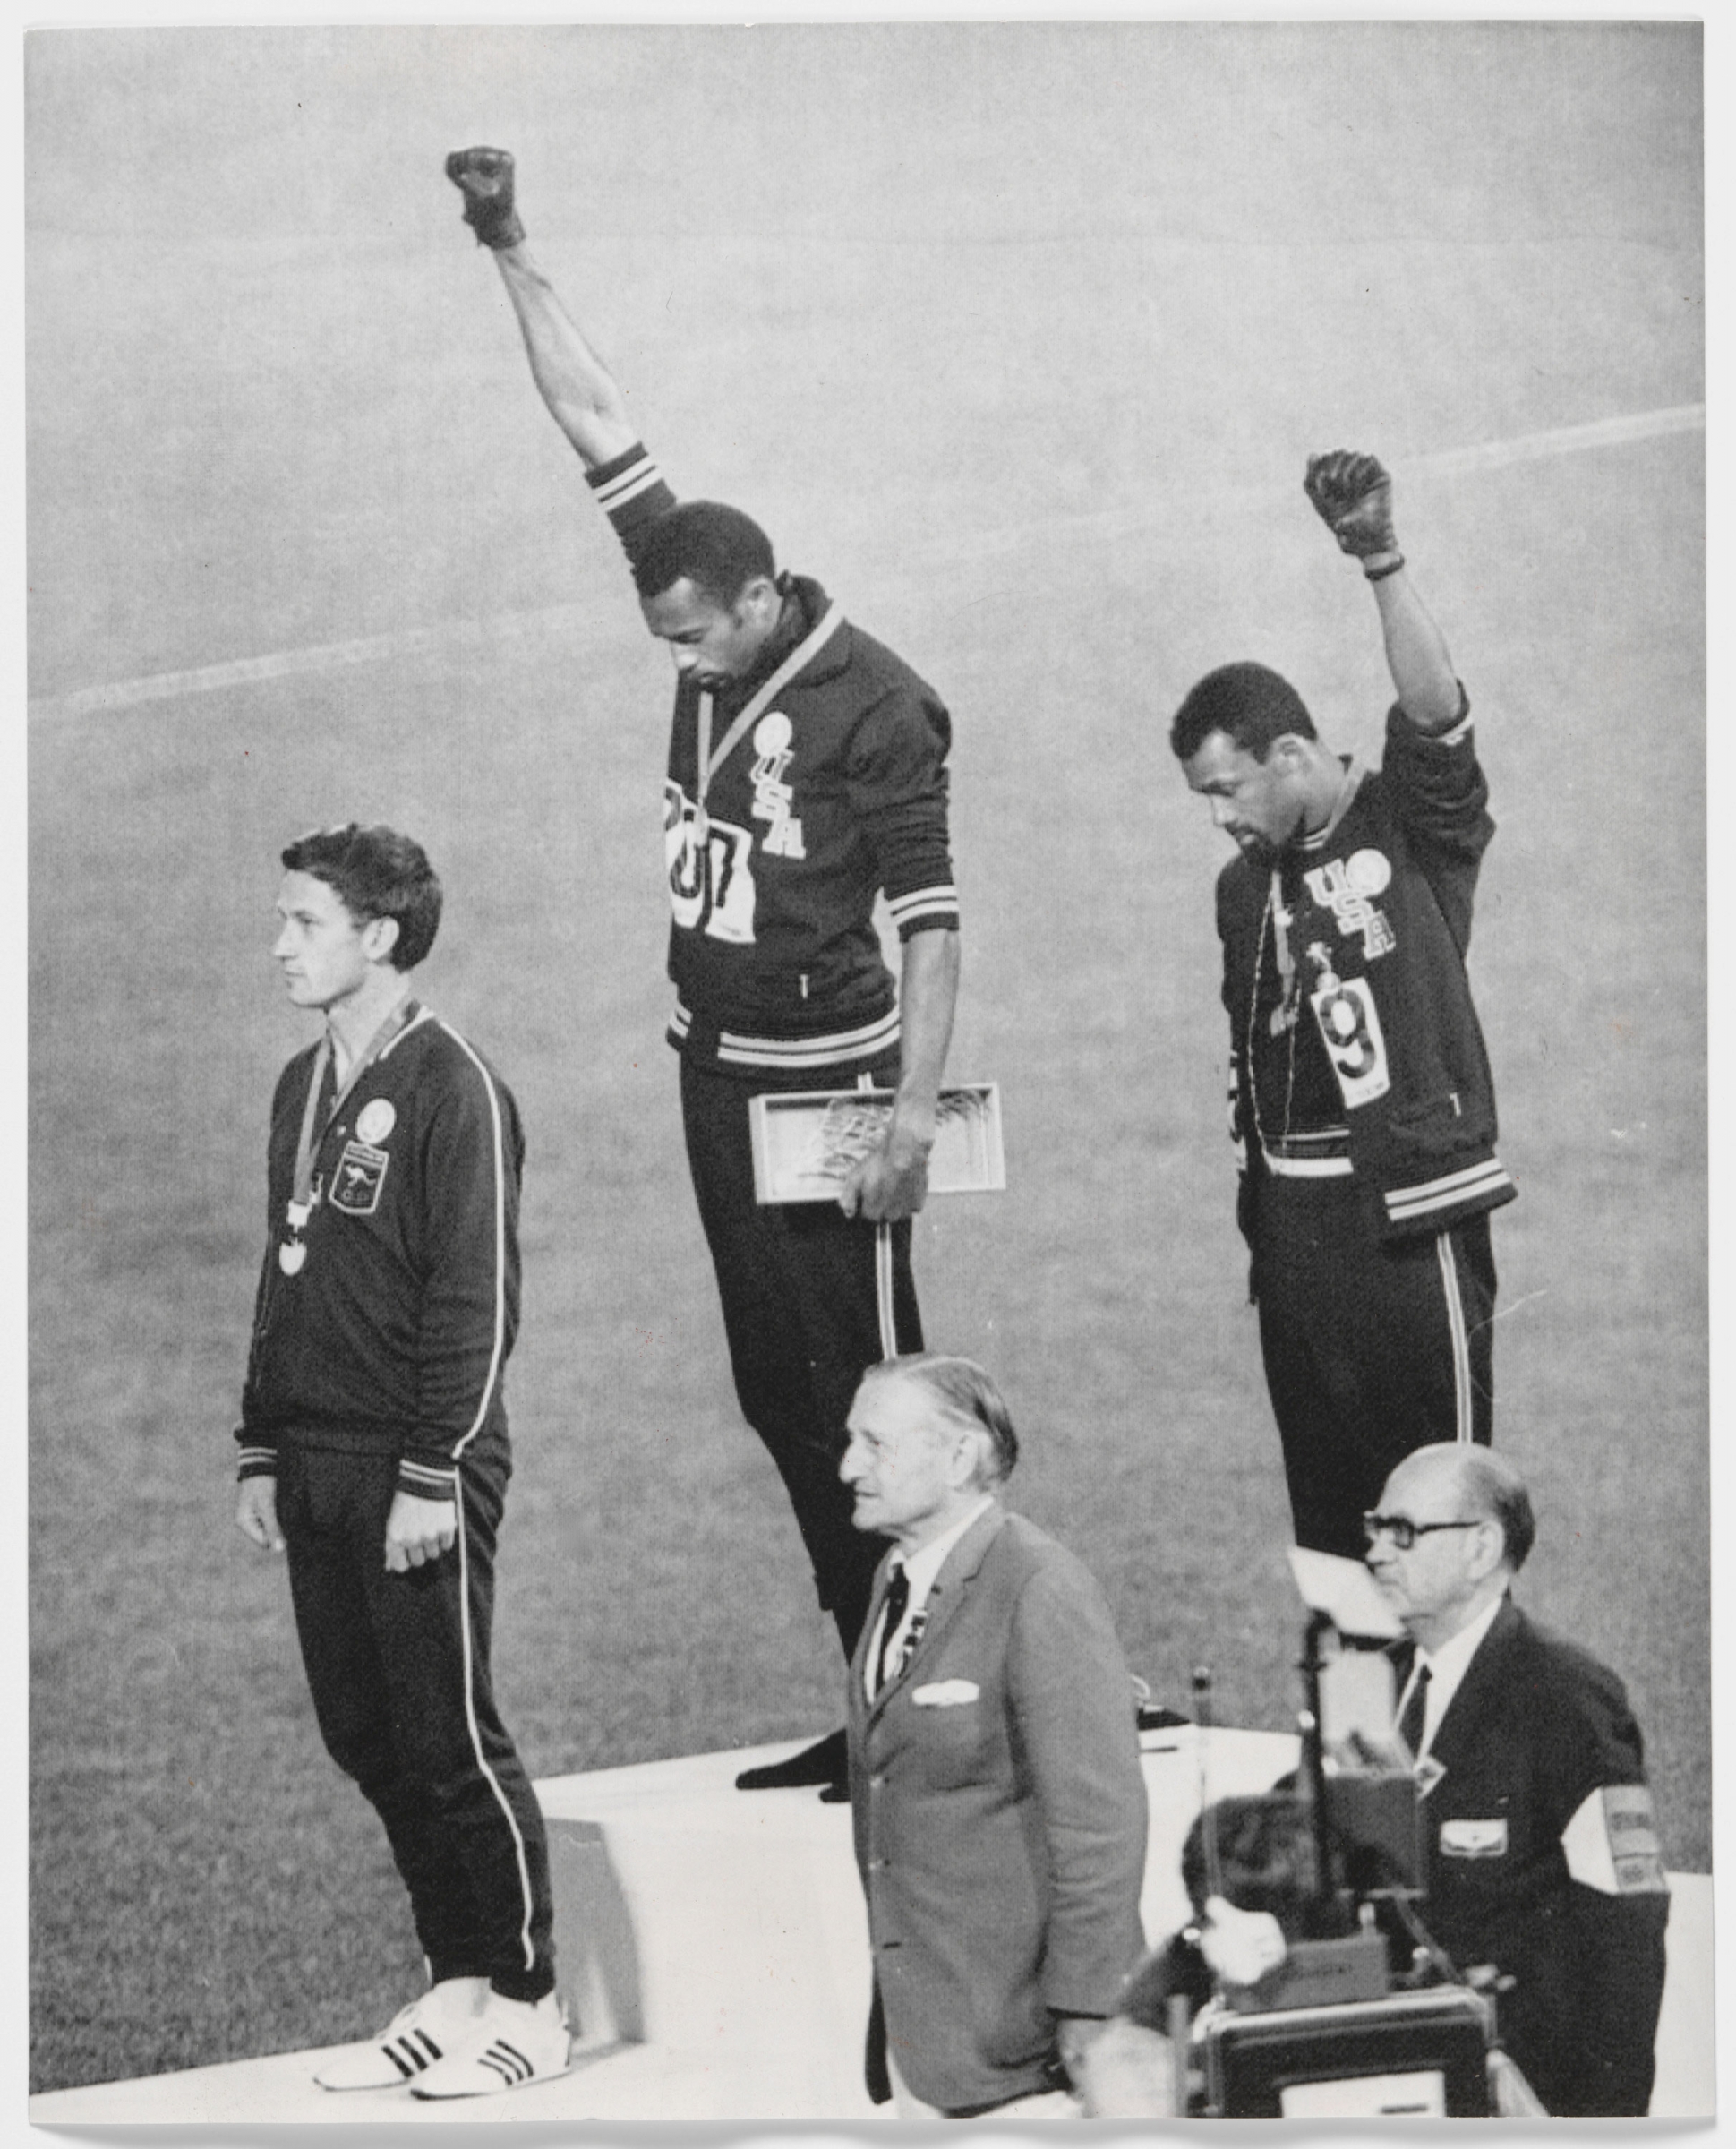 Tommie Smith, John Carlos and Peter Norman stand on an Olympic podium. Smith and Carlos have their fists raised.